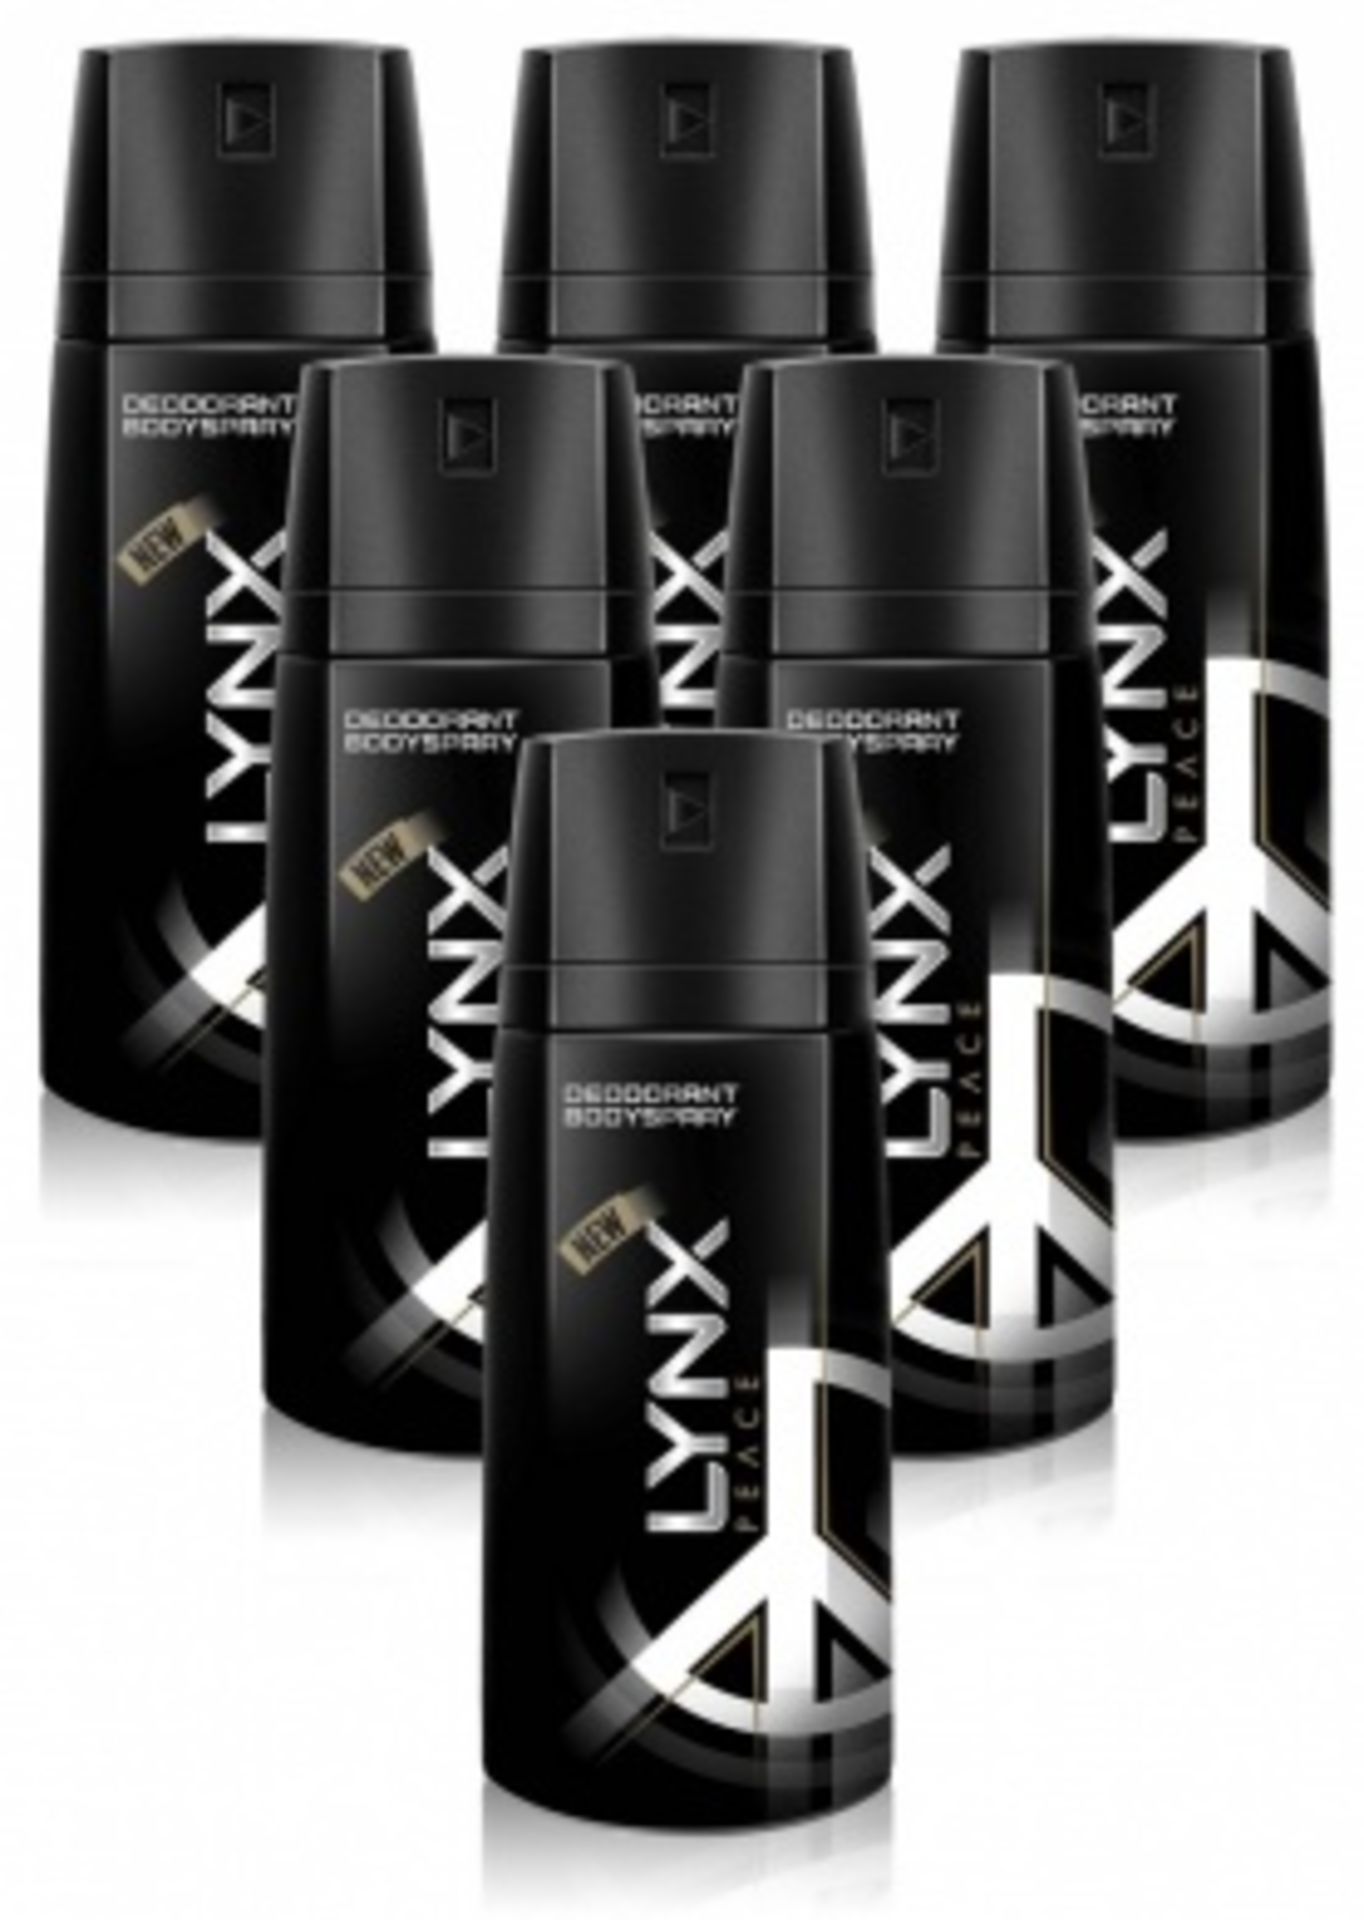 V Brand New 6 x Lynx (Axe) Peace Deodorant Body Spray 150ml Total ISP For 6 £18.90 (Picture shows - Image 3 of 4